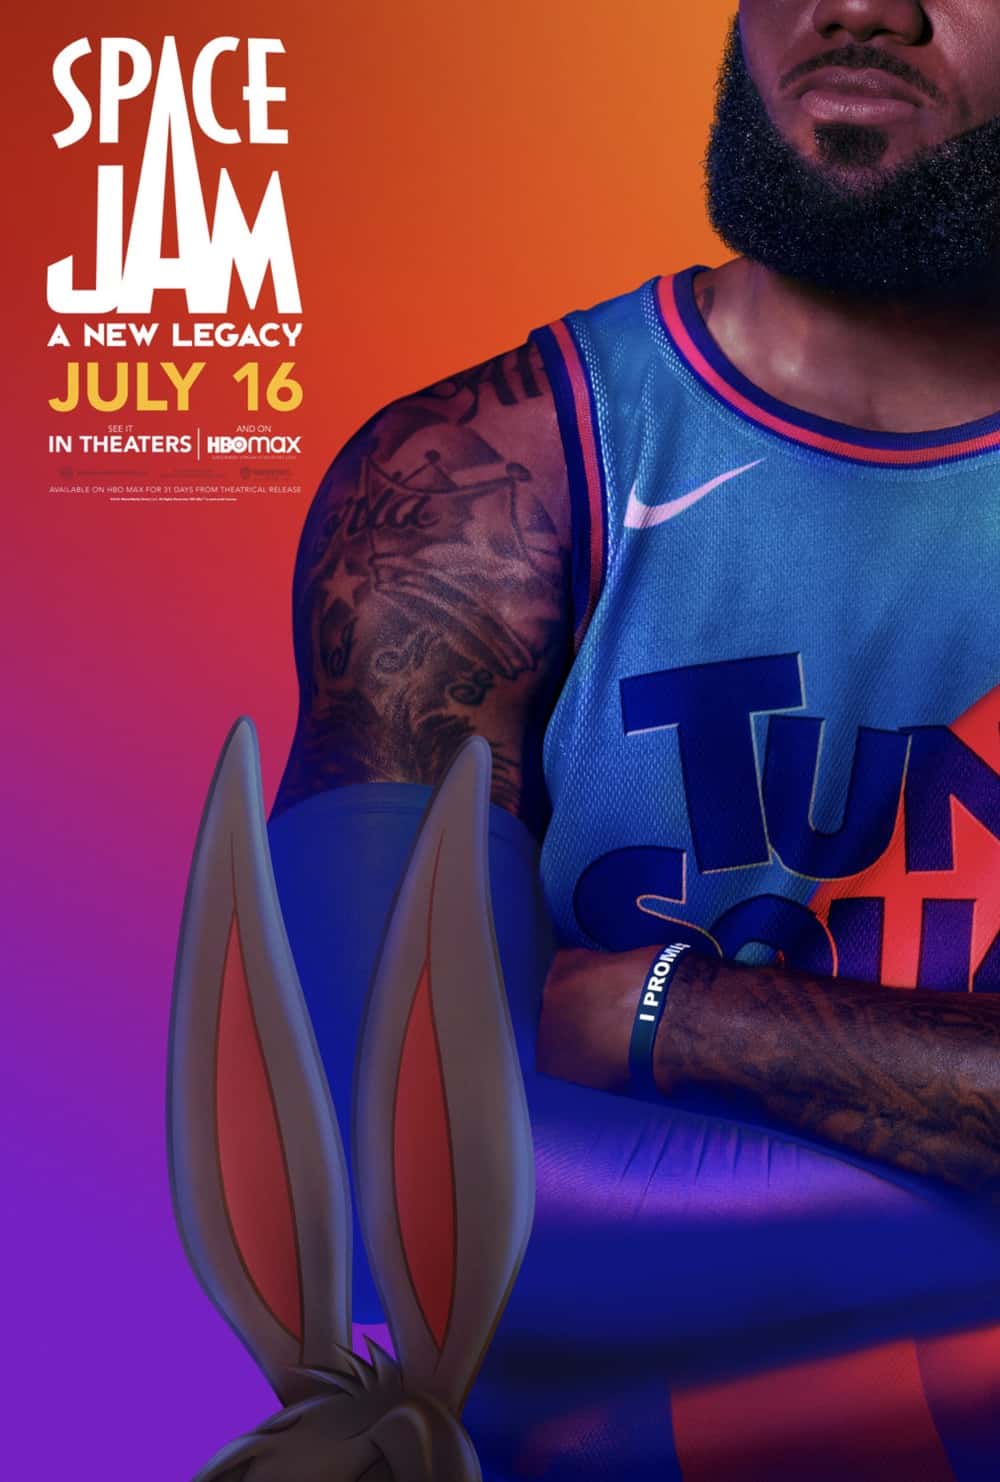 SPACE JAM A NEW LEGACY Posters